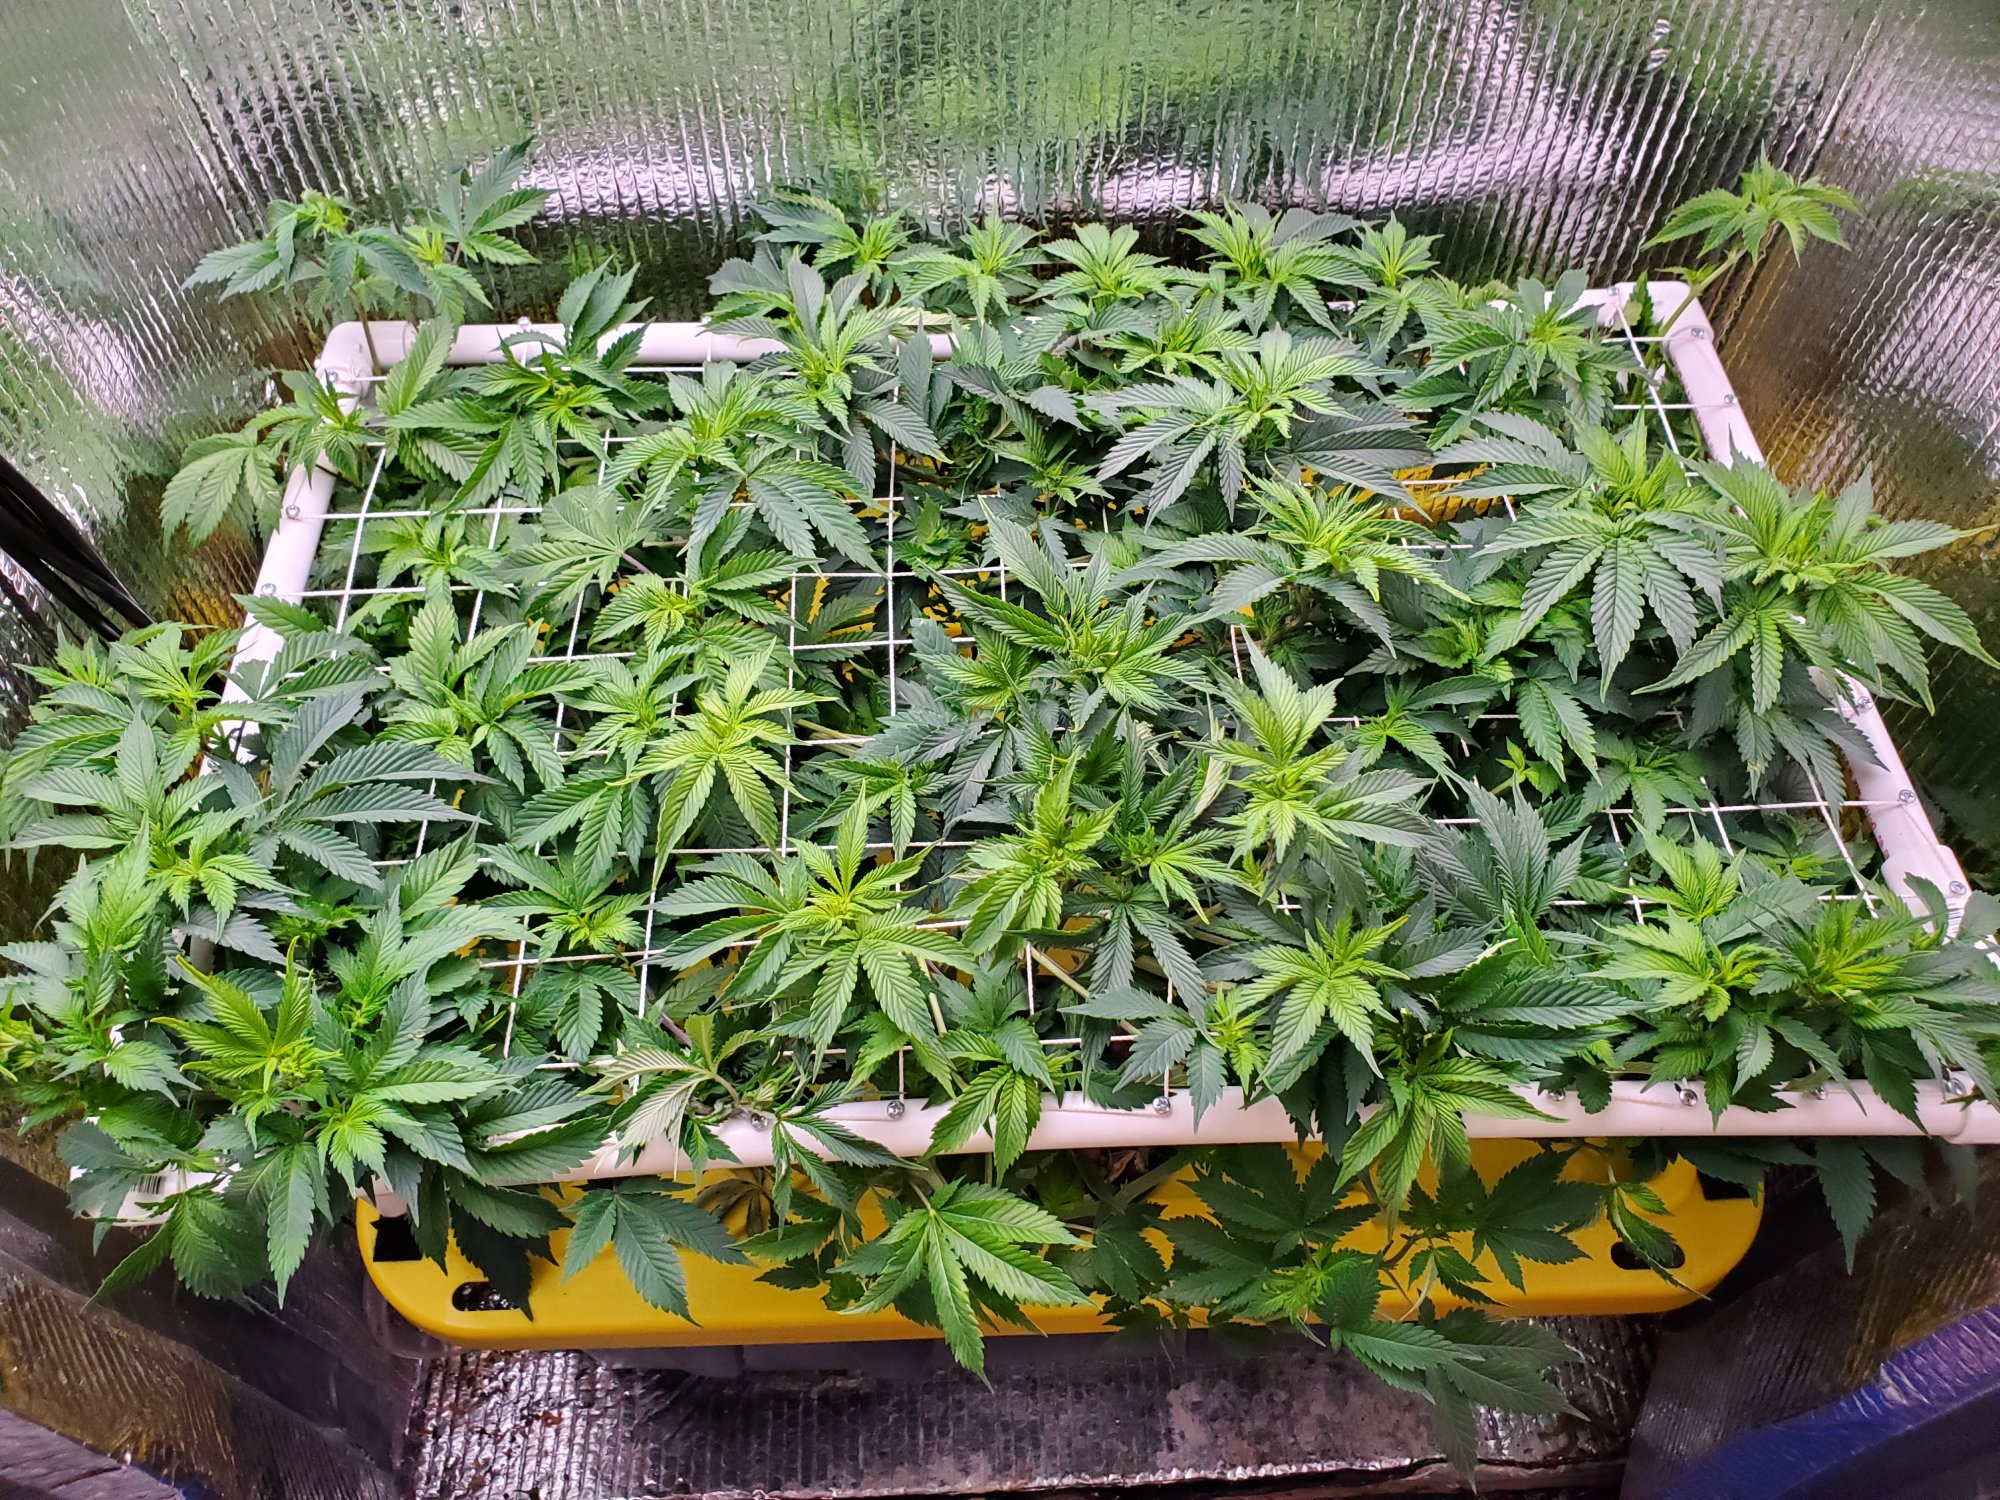 Round 2 clones for funzies going to strip the helloutta this grow